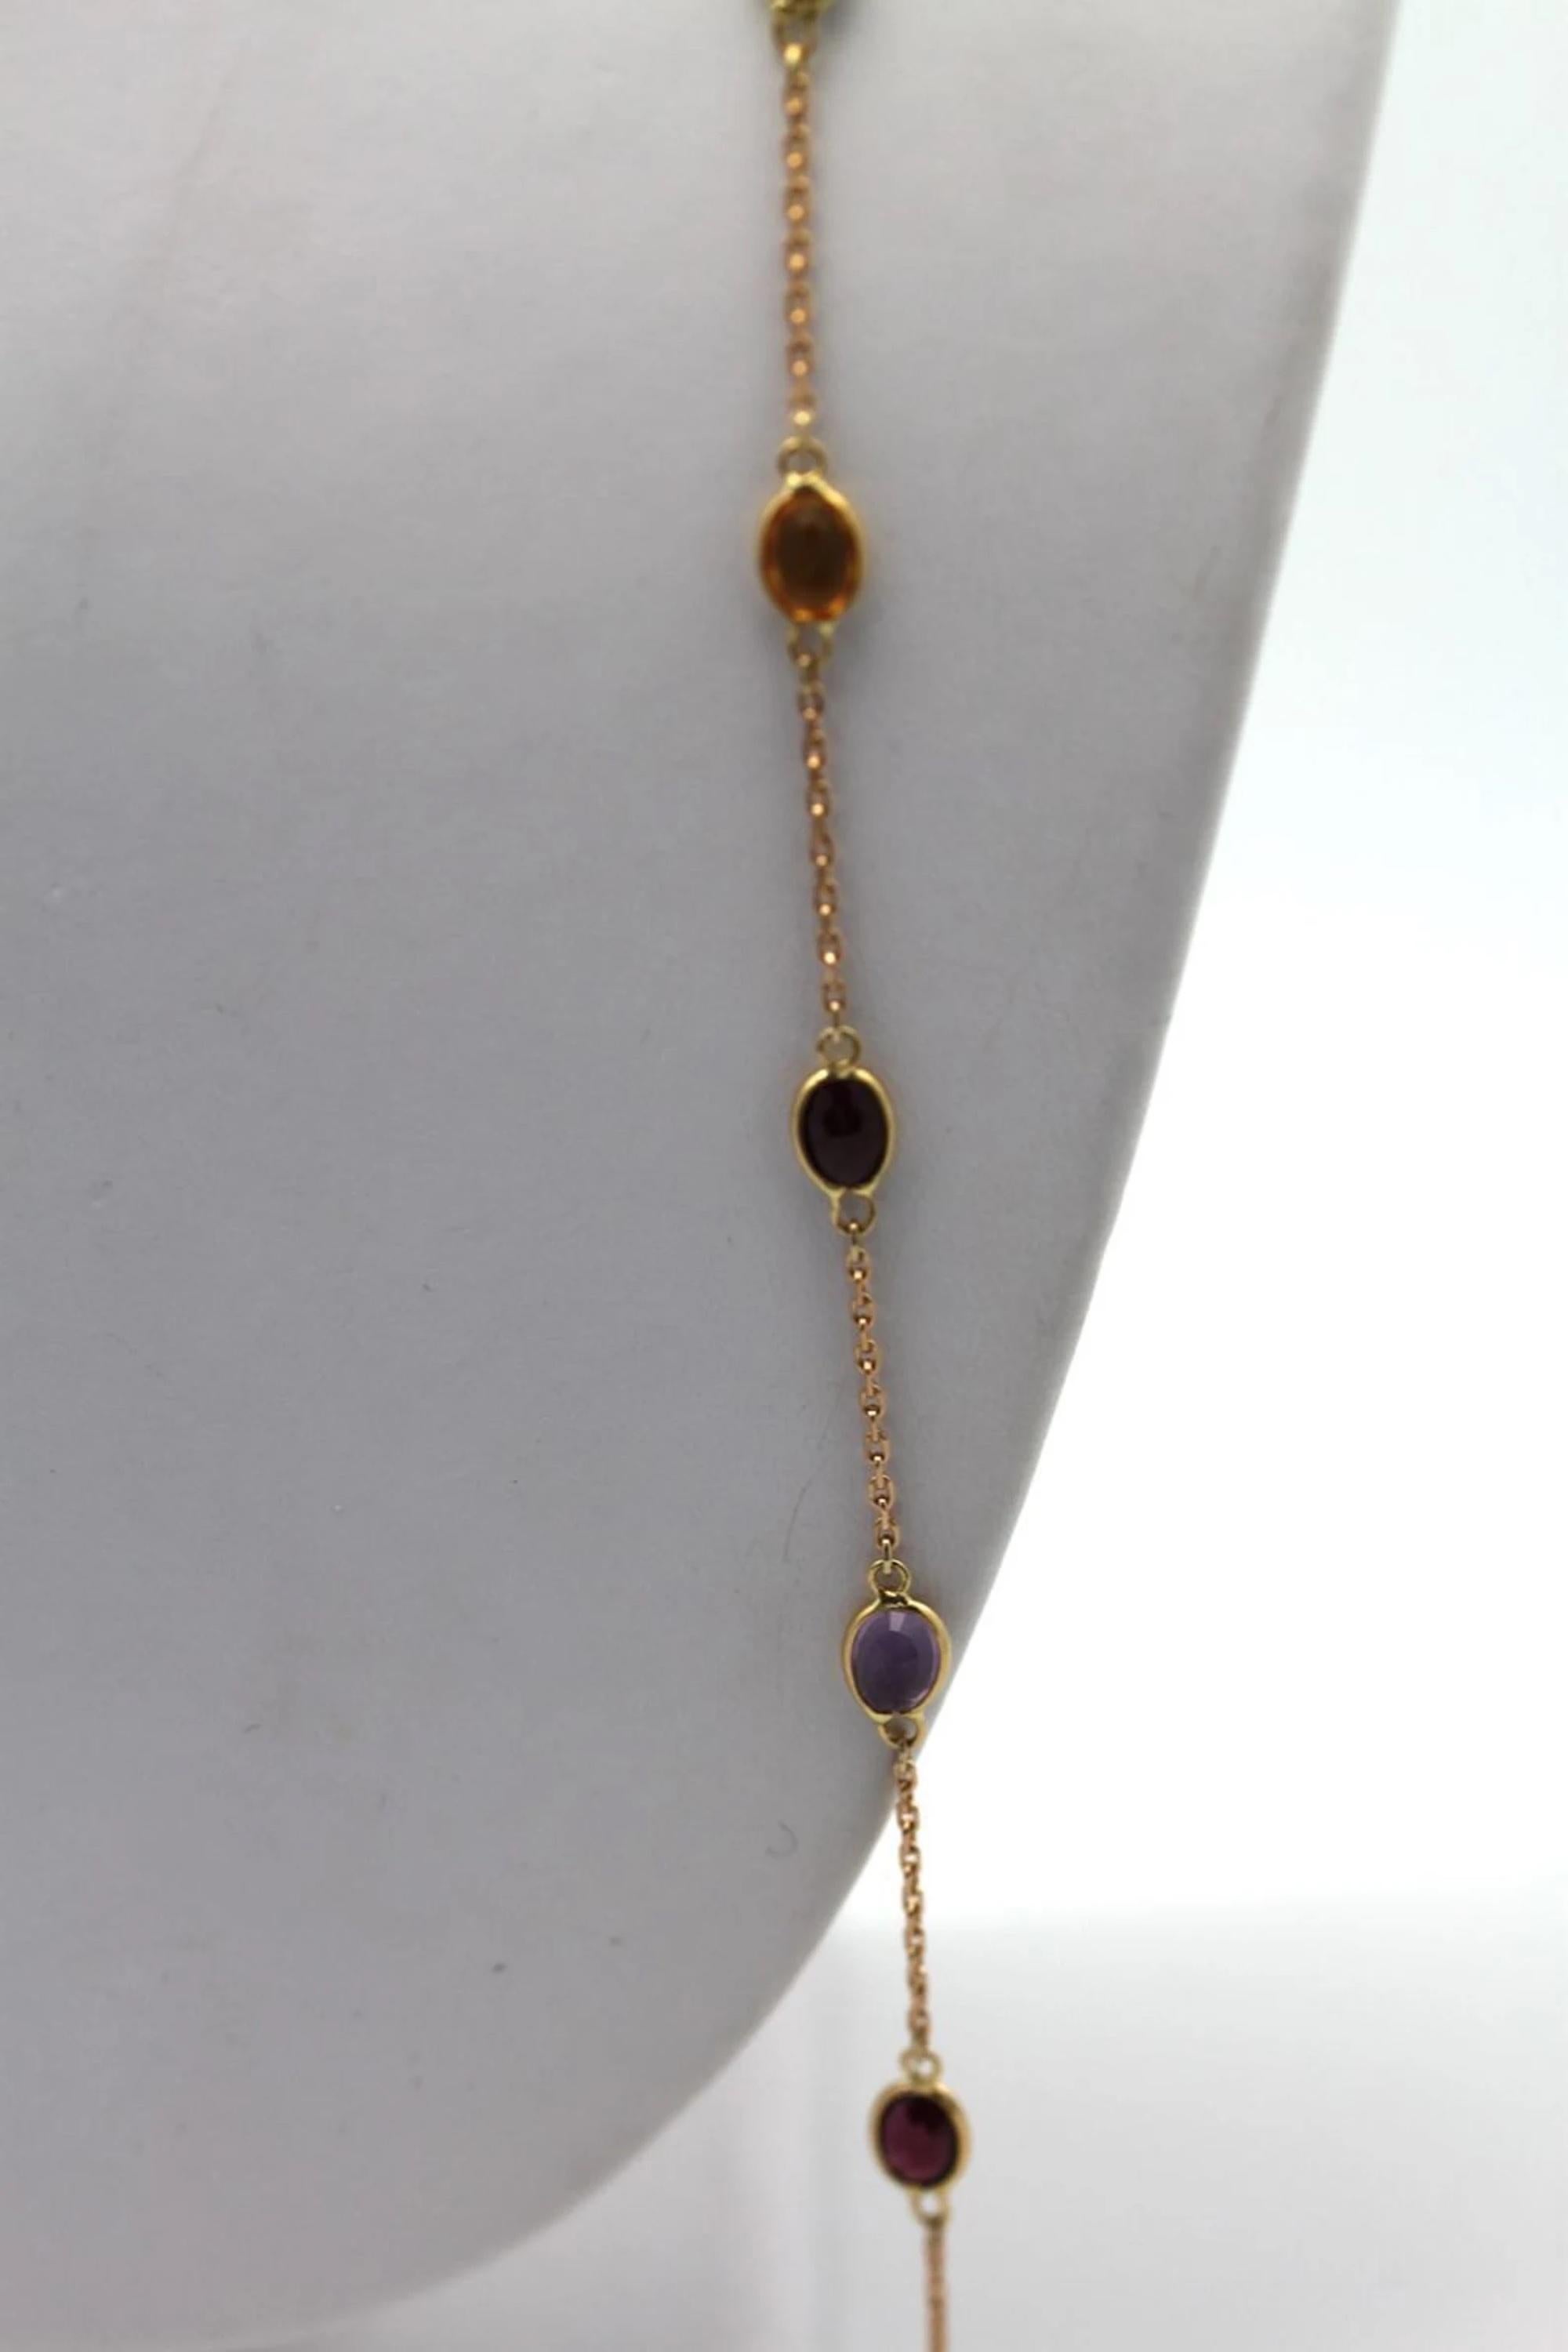 This lovely 18k yellow gold chain is quite long at approximately 32